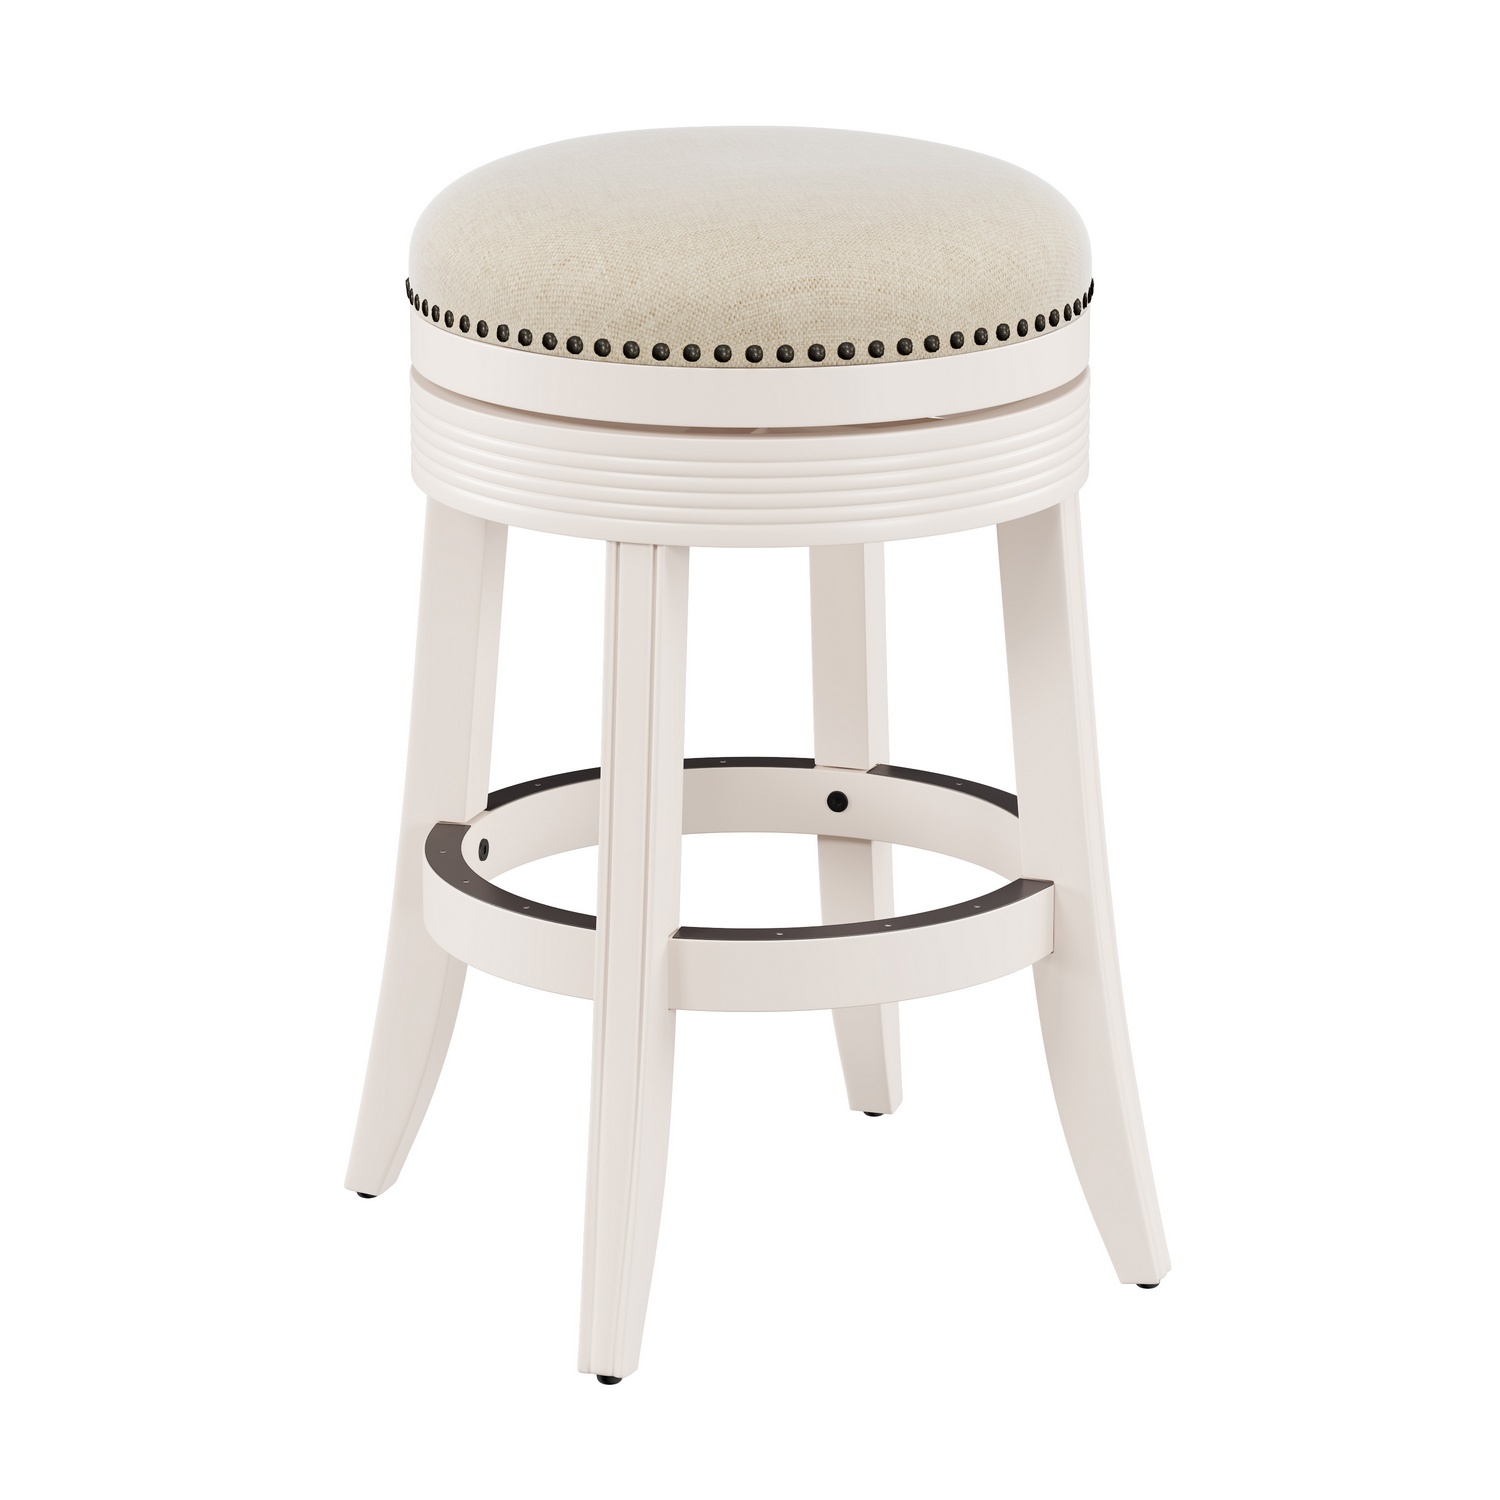 Hillsdale Tillman Wood Backless Counter Height Swivel Stool - White